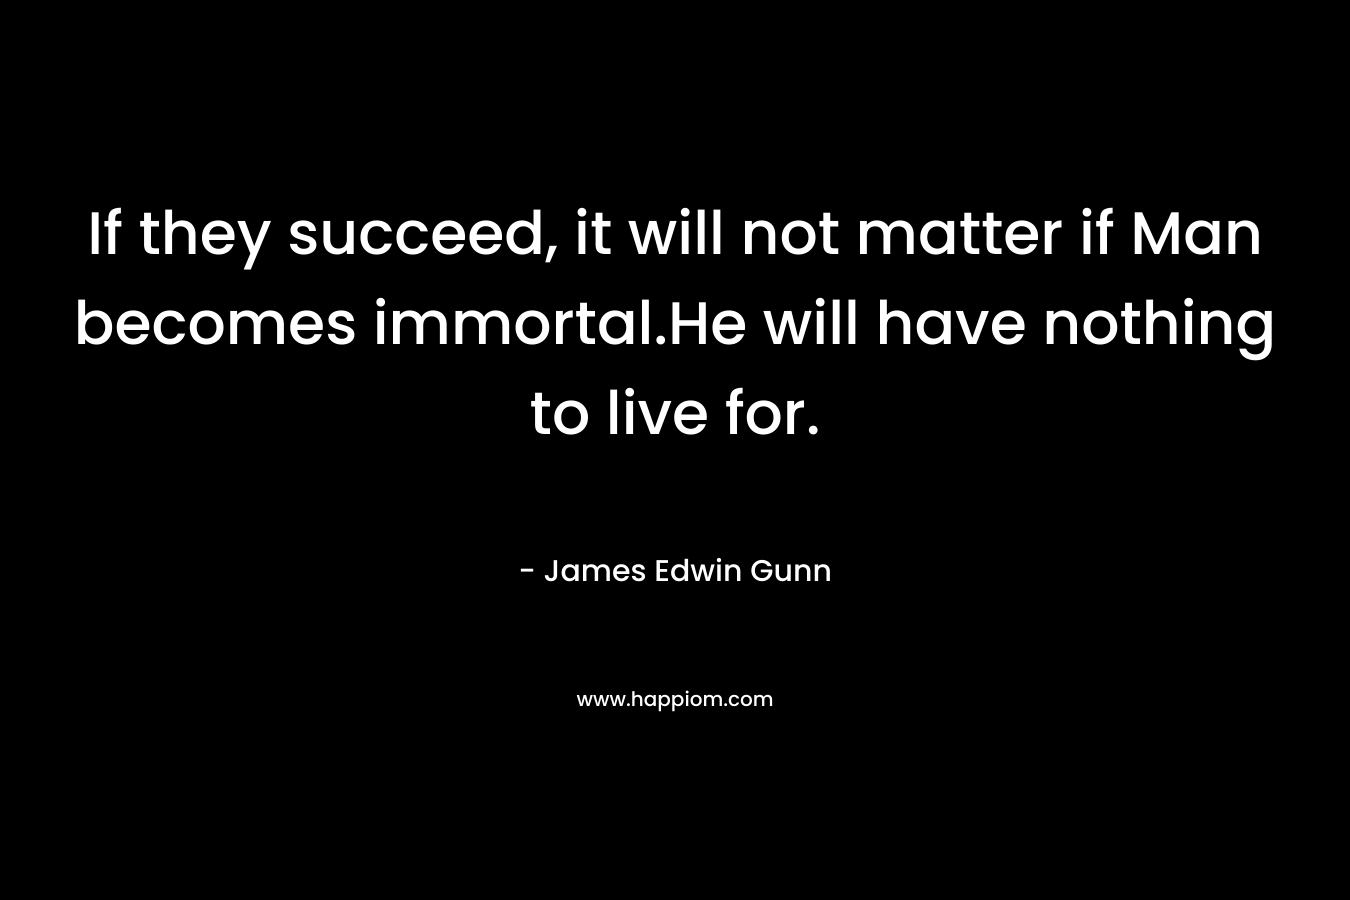 If they succeed, it will not matter if Man becomes immortal.He will have nothing to live for.